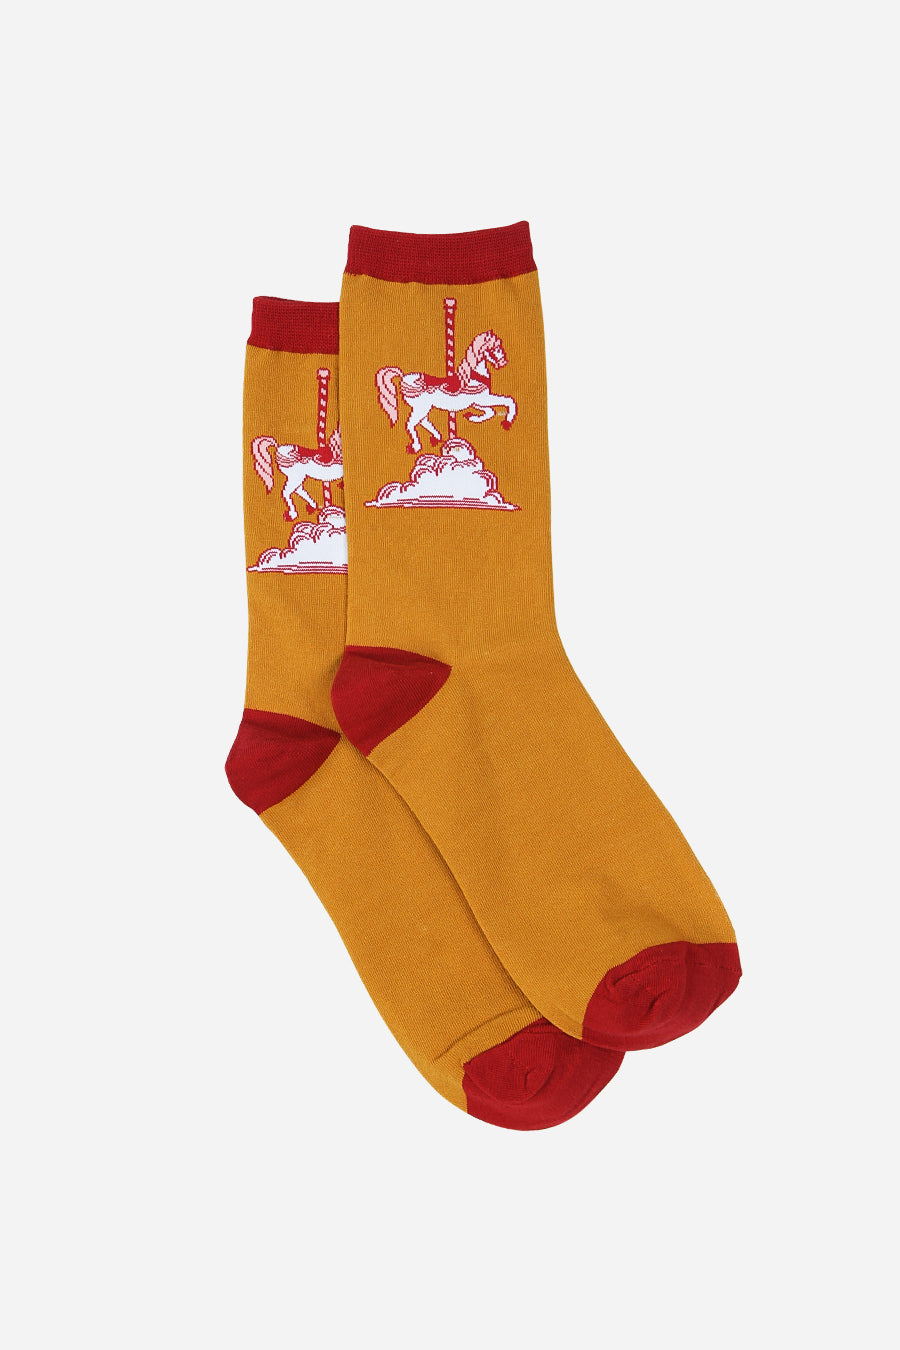 Womens Cotton Ankle Socks Horse Print Carousel Mustard Red